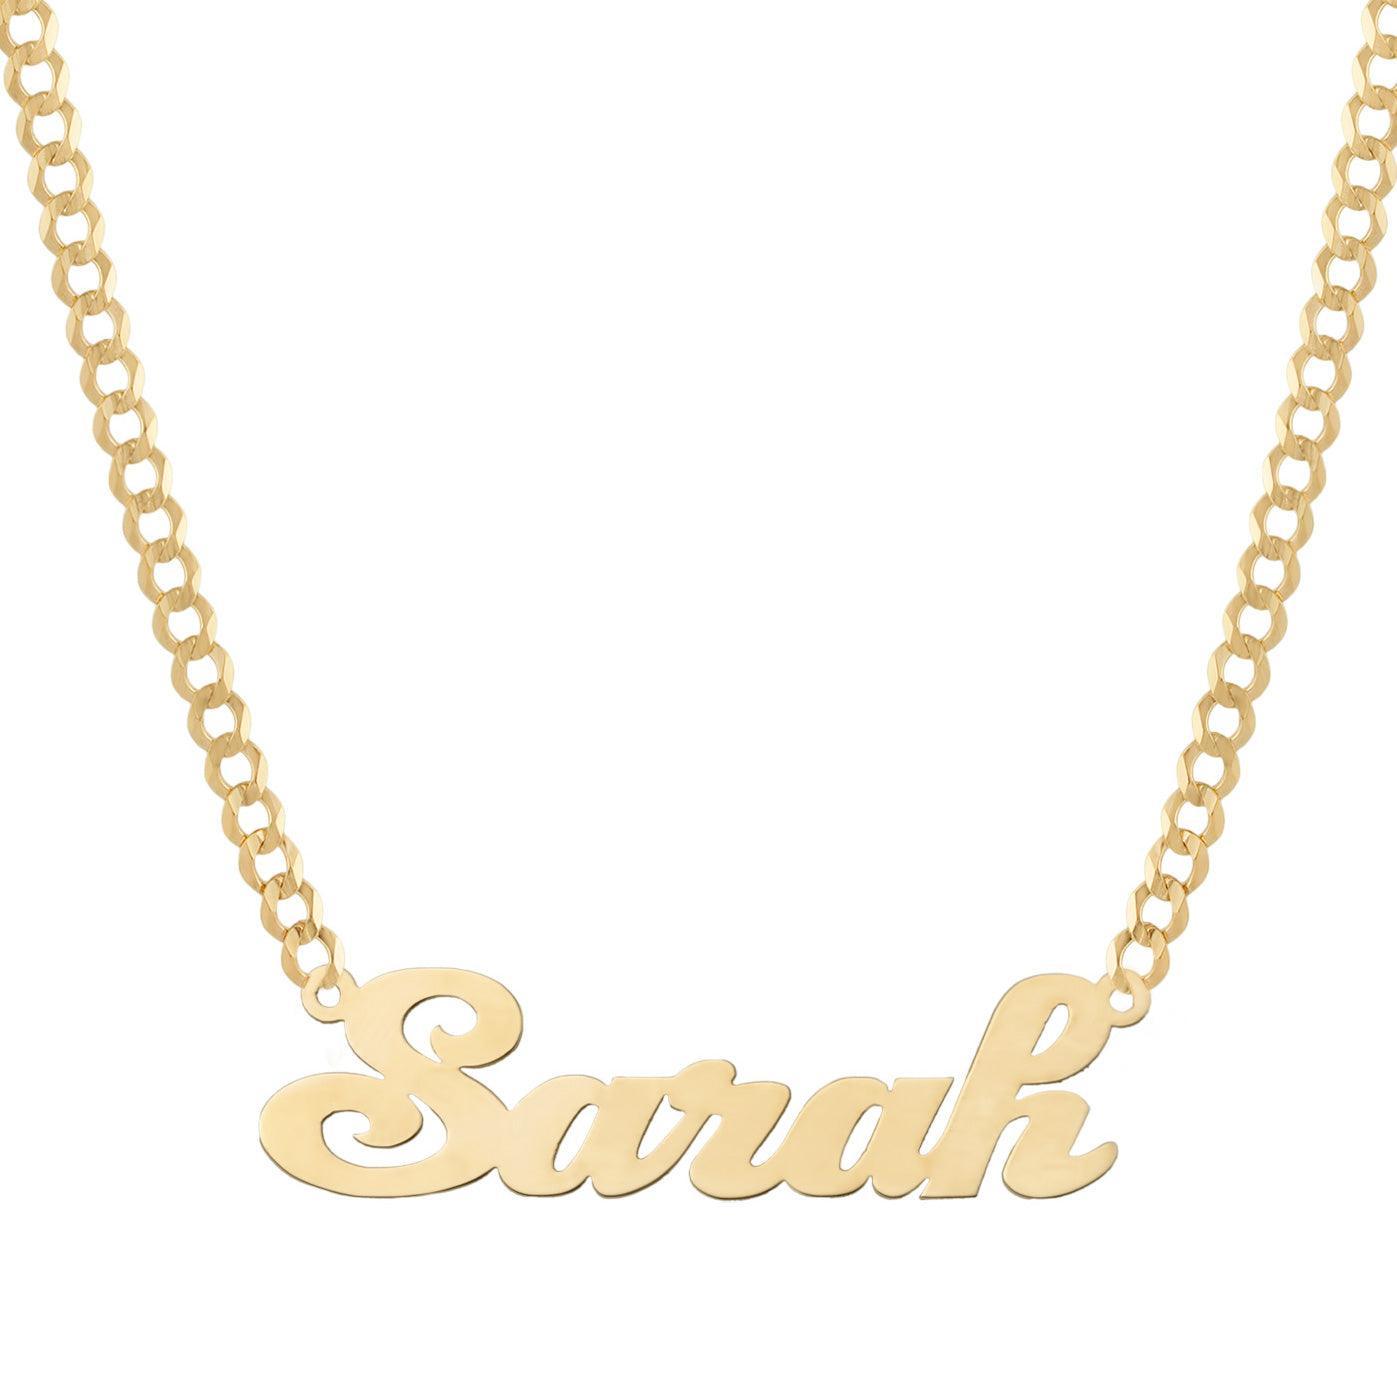 Ladies Script Name Plate Necklace 14K Gold - Style 117 - bayamjewelry